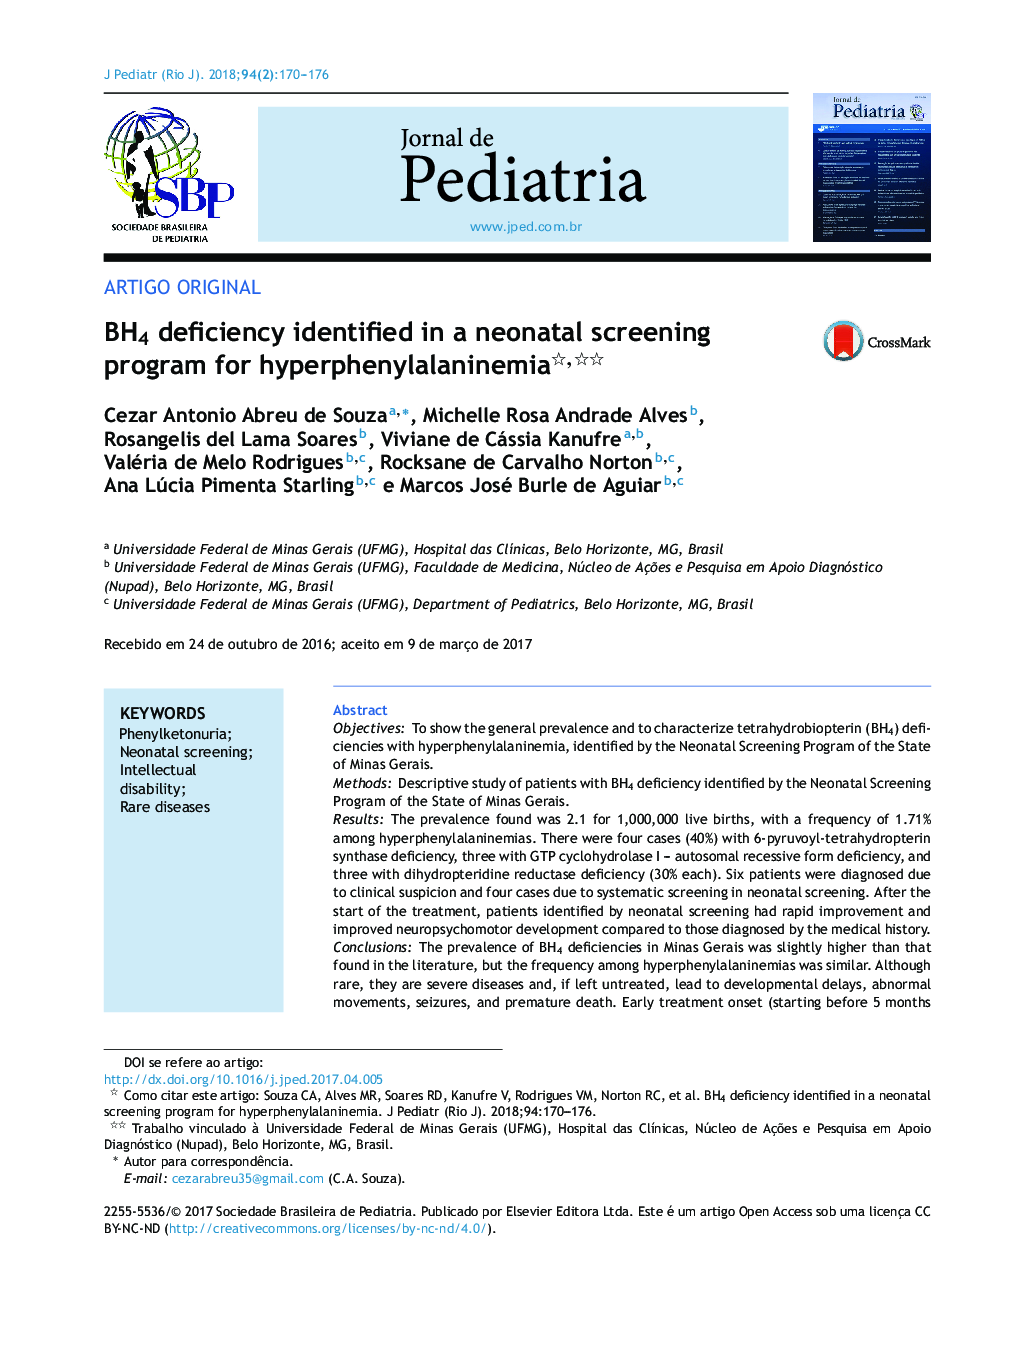 BH4 deficiency identified in a neonatal screening program for hyperphenylalaninemia